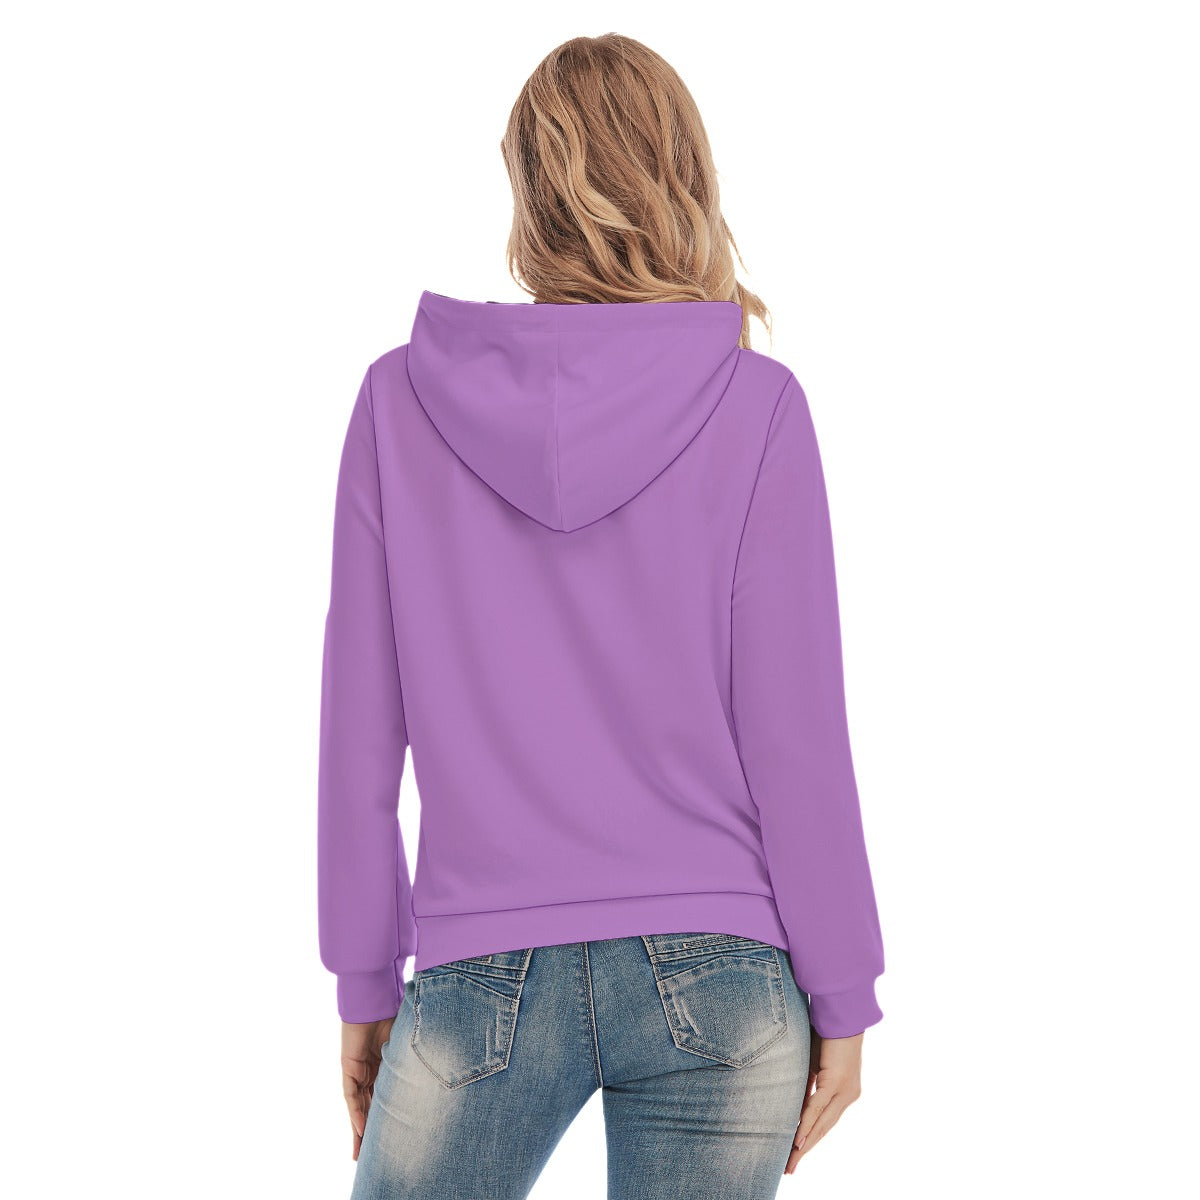 All-Over Print Women's Slim Pullover Hoodie